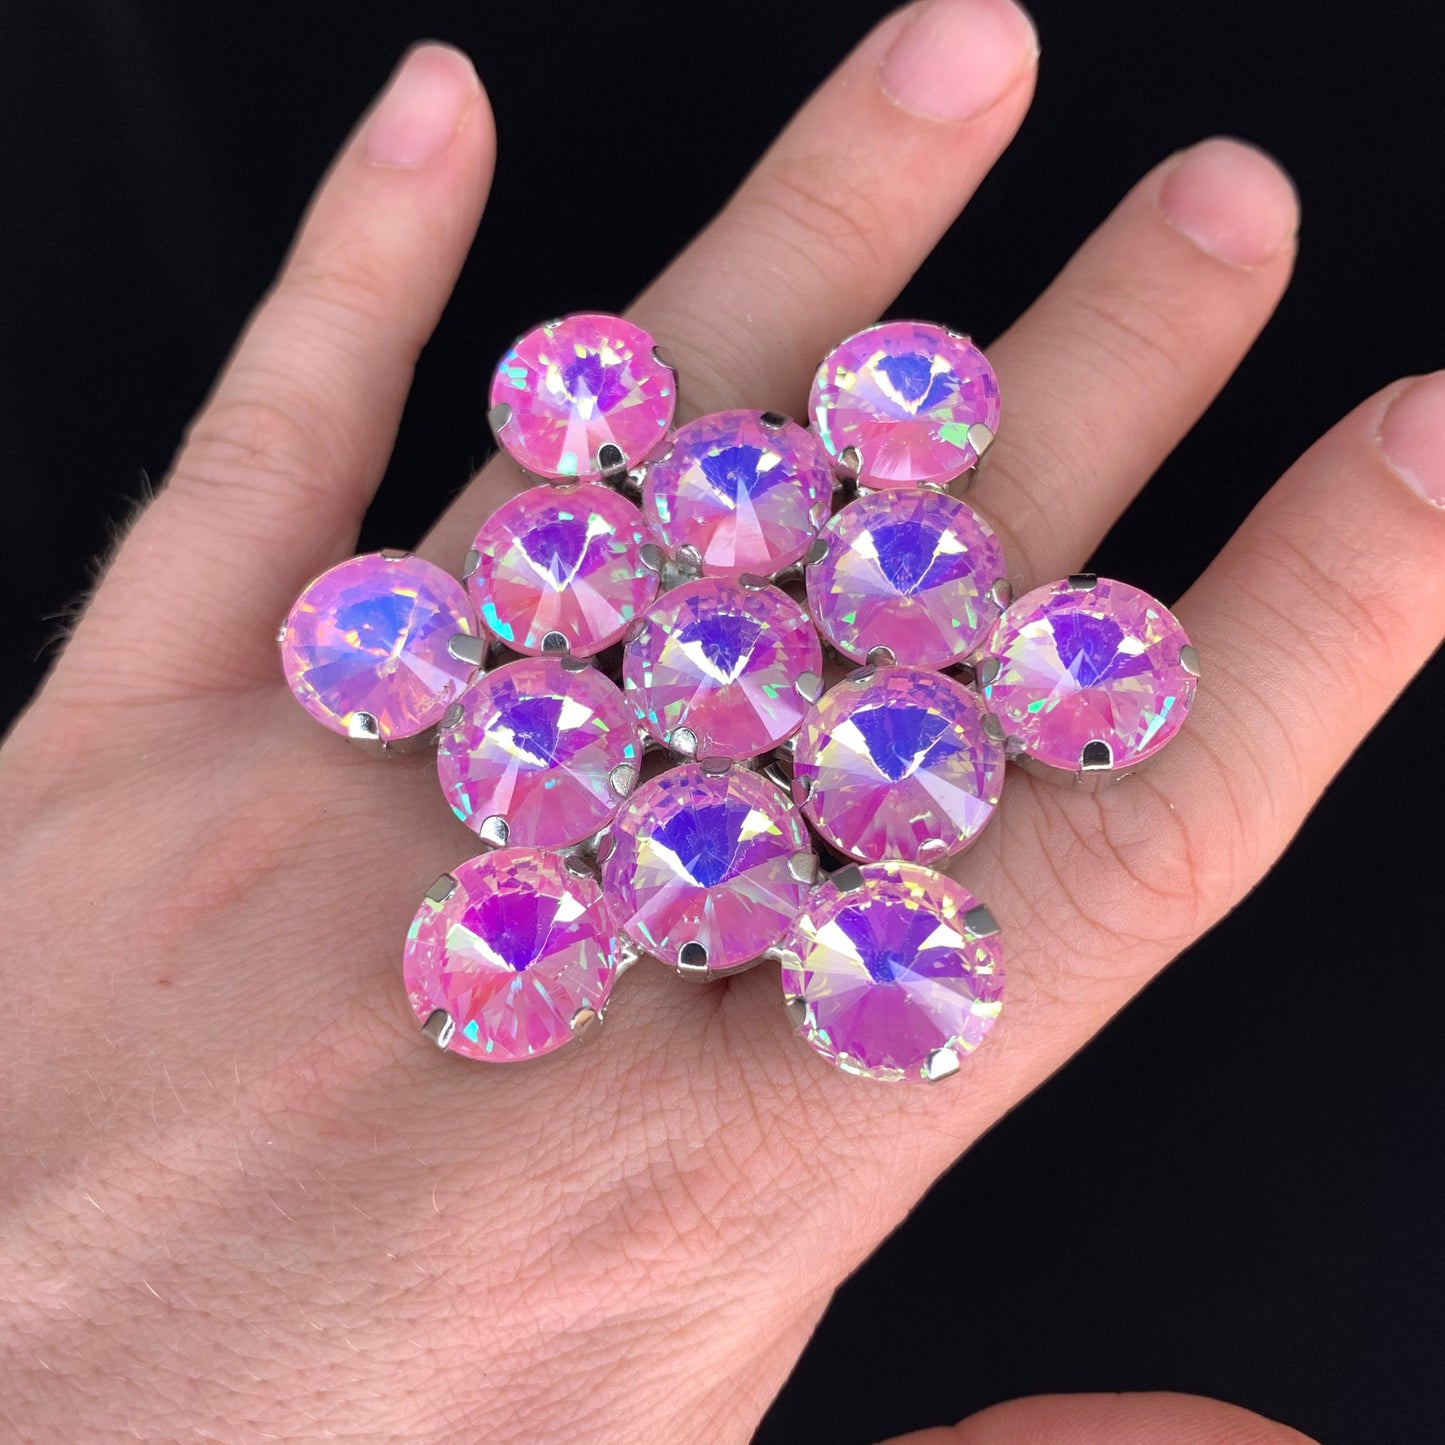 XL Honeycomb Ring / Cocktail Dress Ring / Adjustable back / Gift / Drag Queen Ring /Costume Jewellery